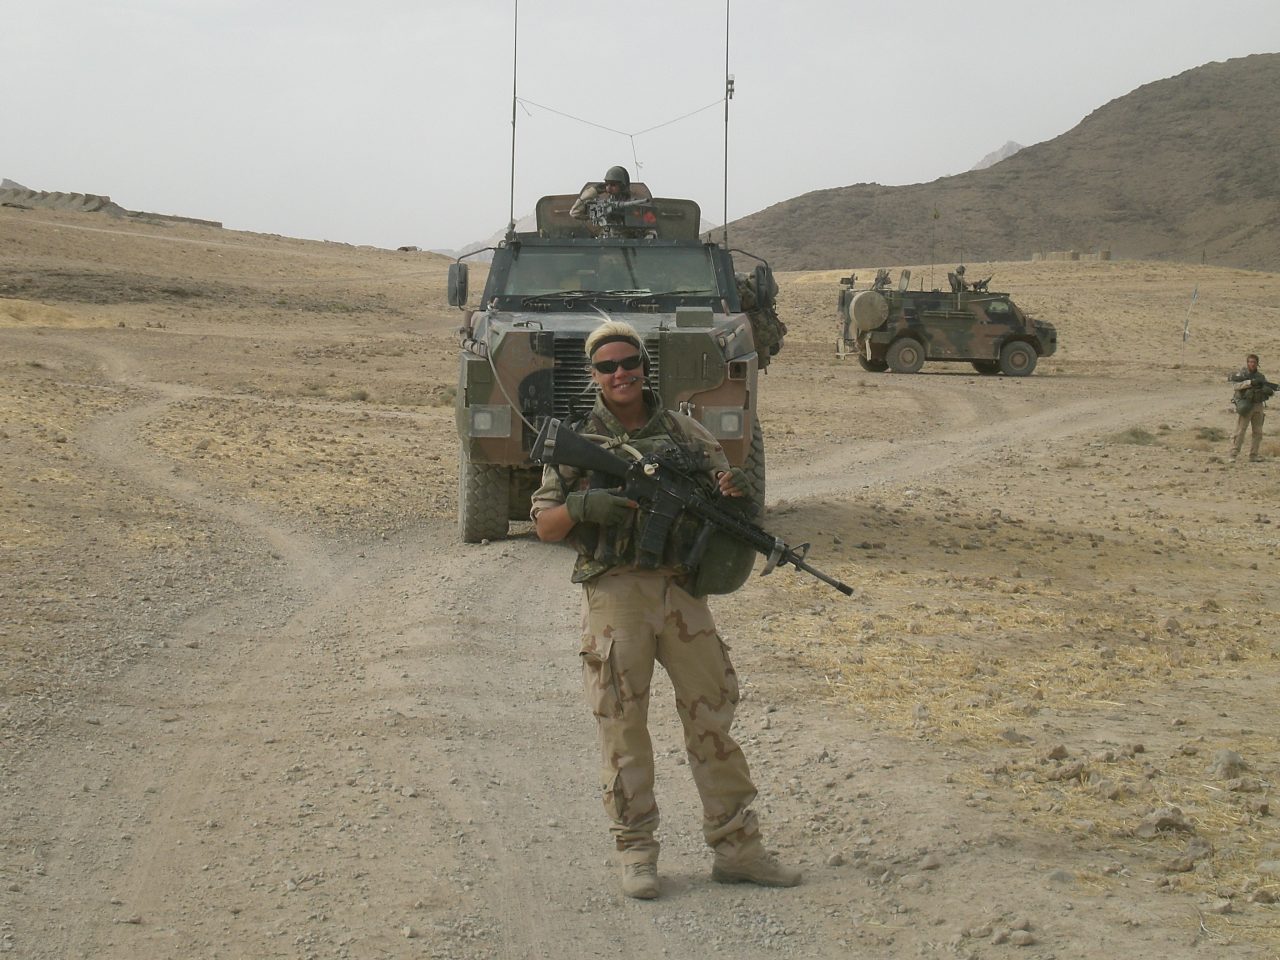 Jessica in Afghanistan